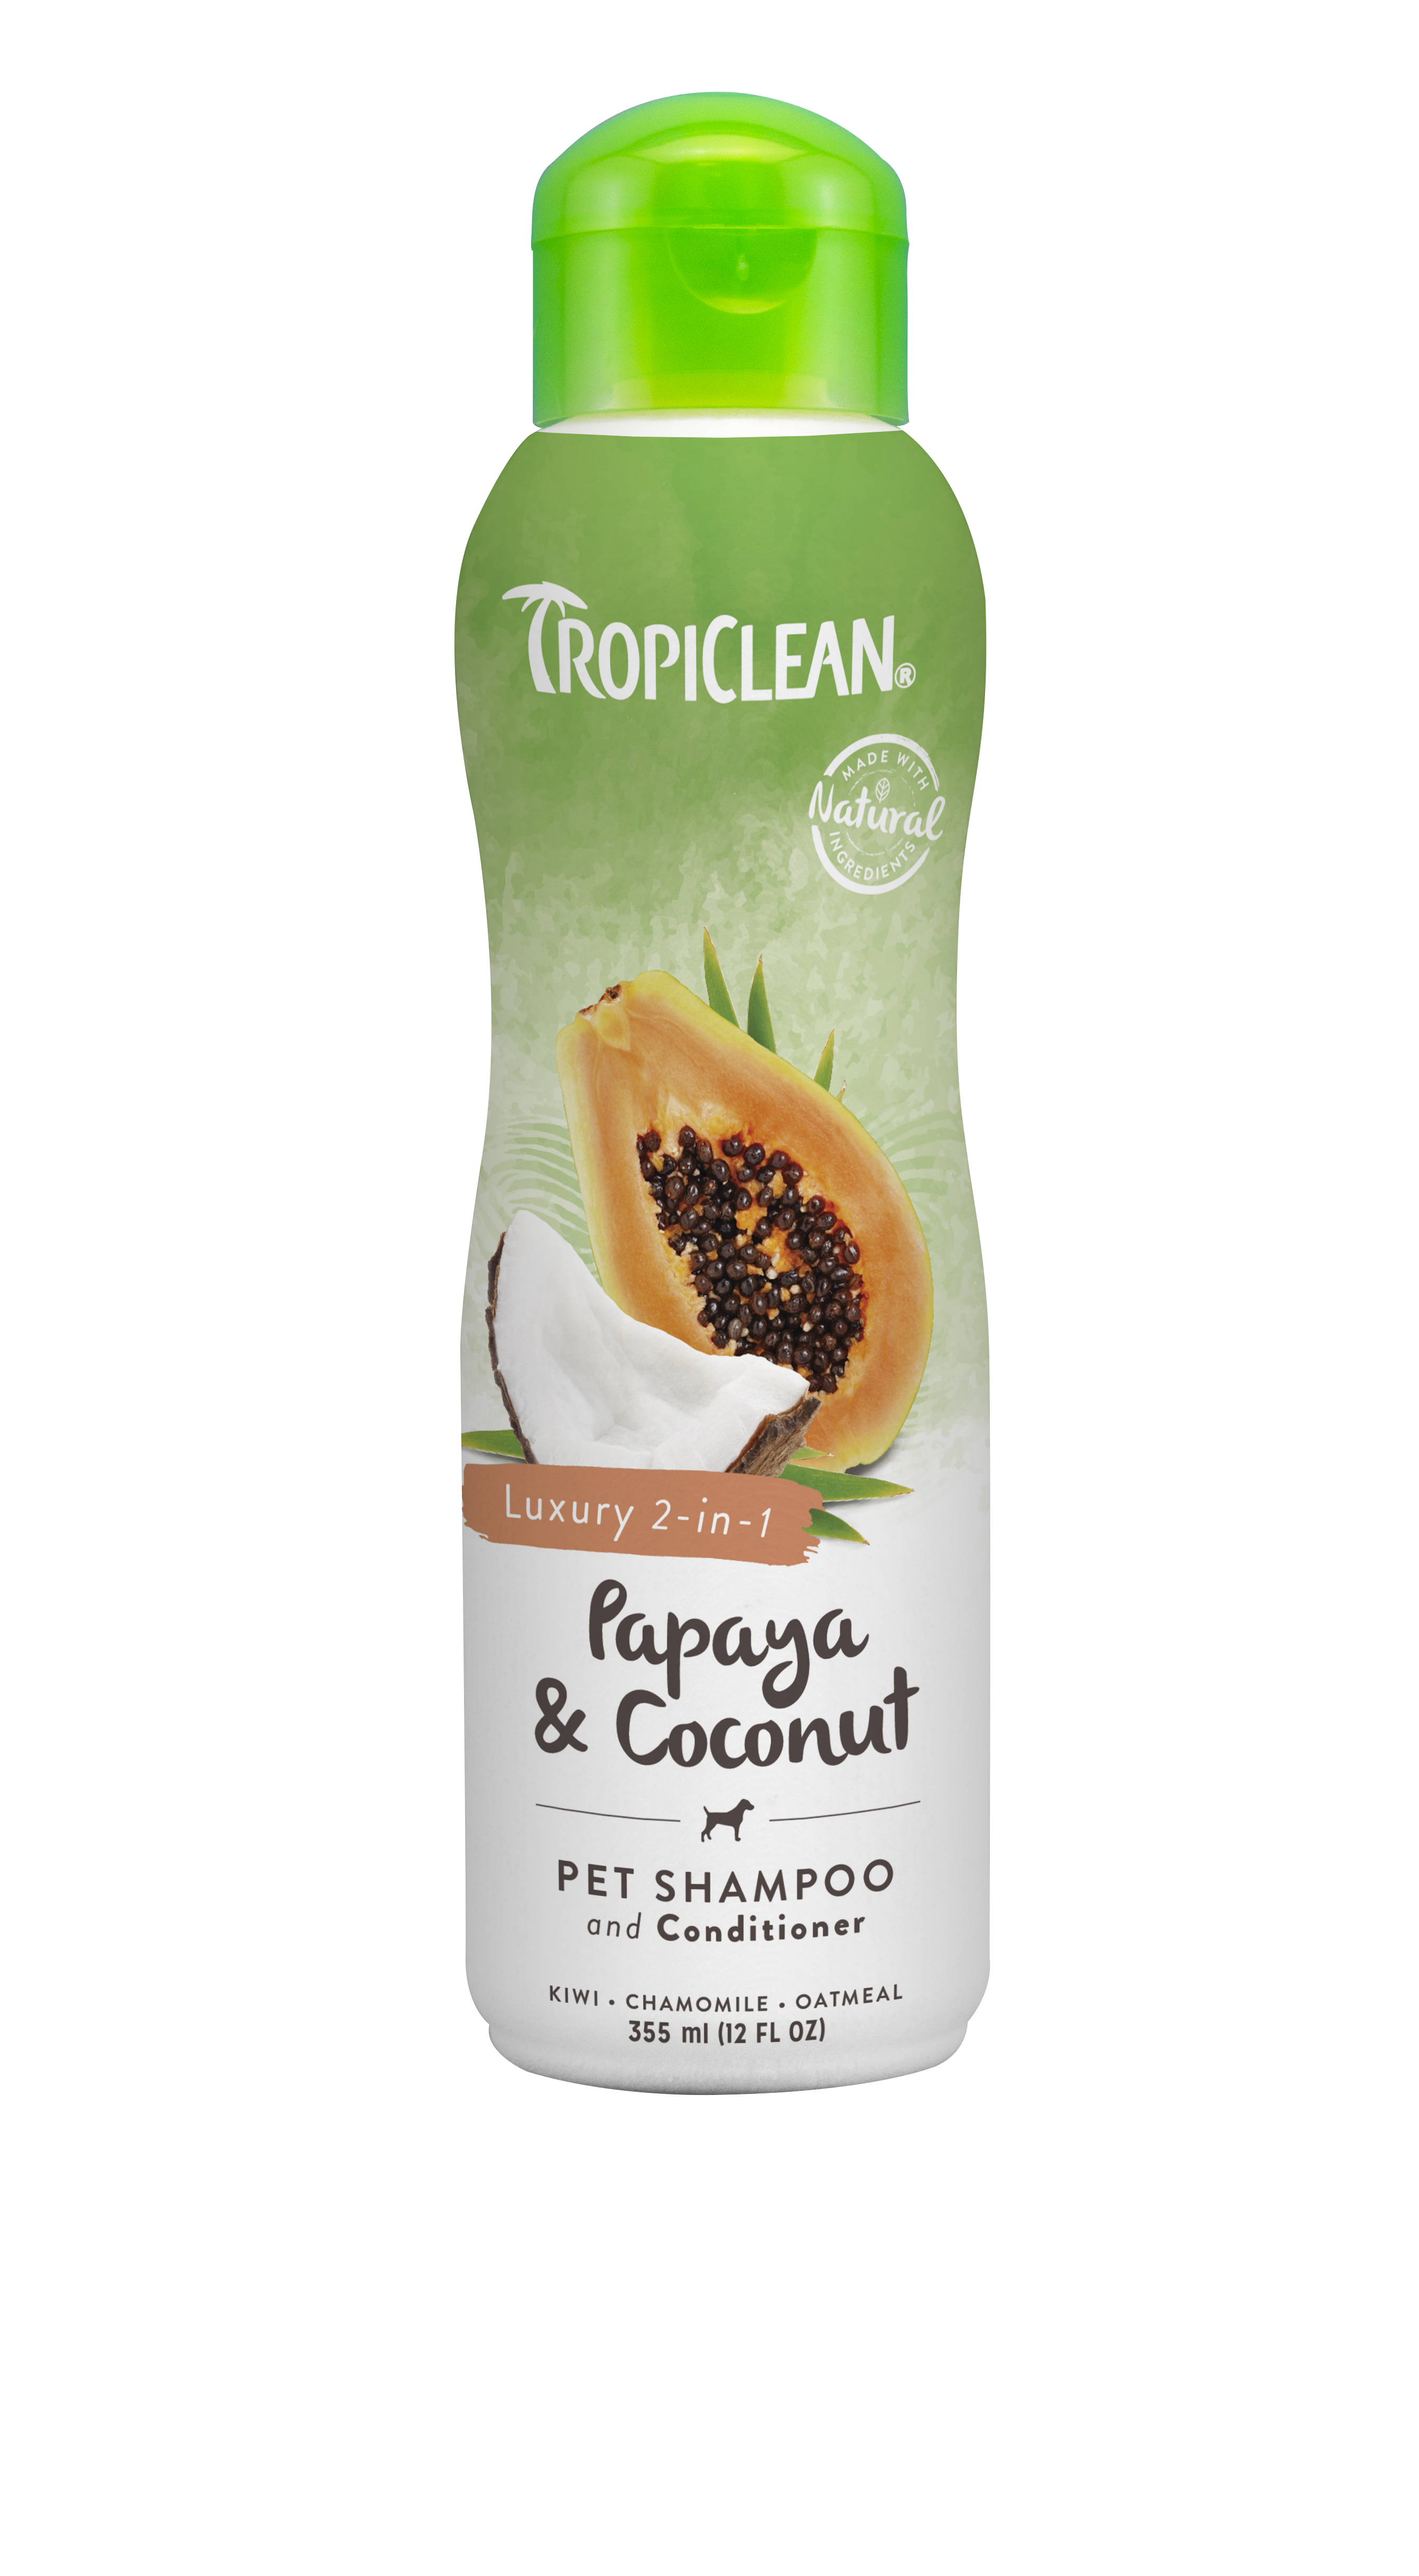 Tropiclean Papaya and Coconut 2-in-1 Shampoo and Conditioner